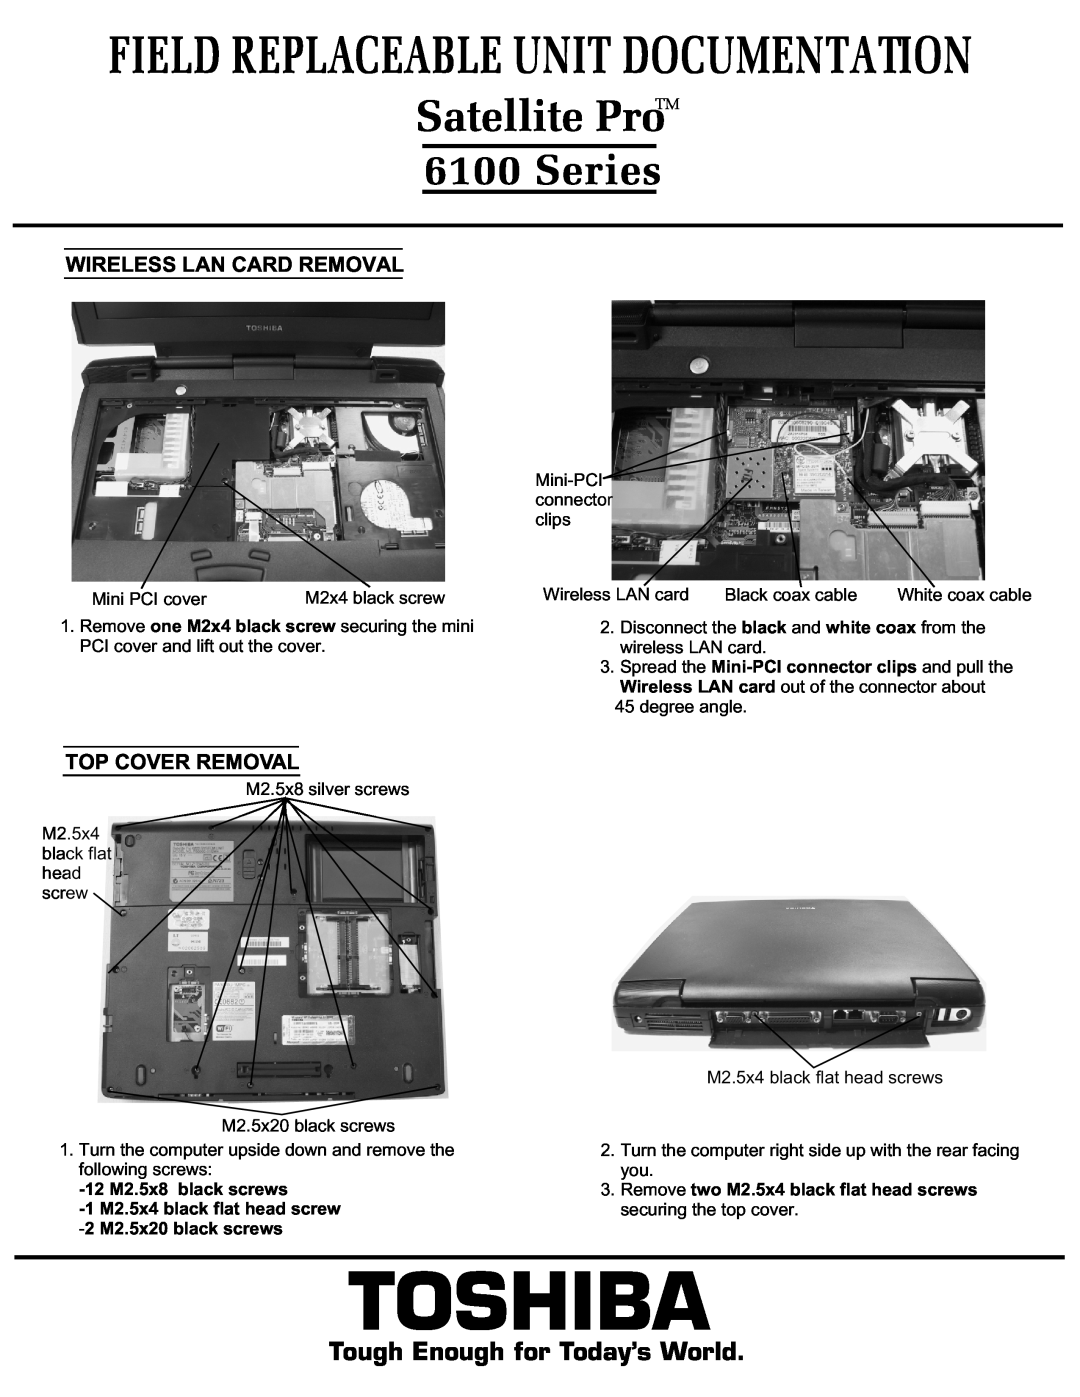 Toshiba 6100 manual Toshiba, Satellite Pro, Field Replaceable Unit Documentation, Series, Tough Enough for Today’s World 